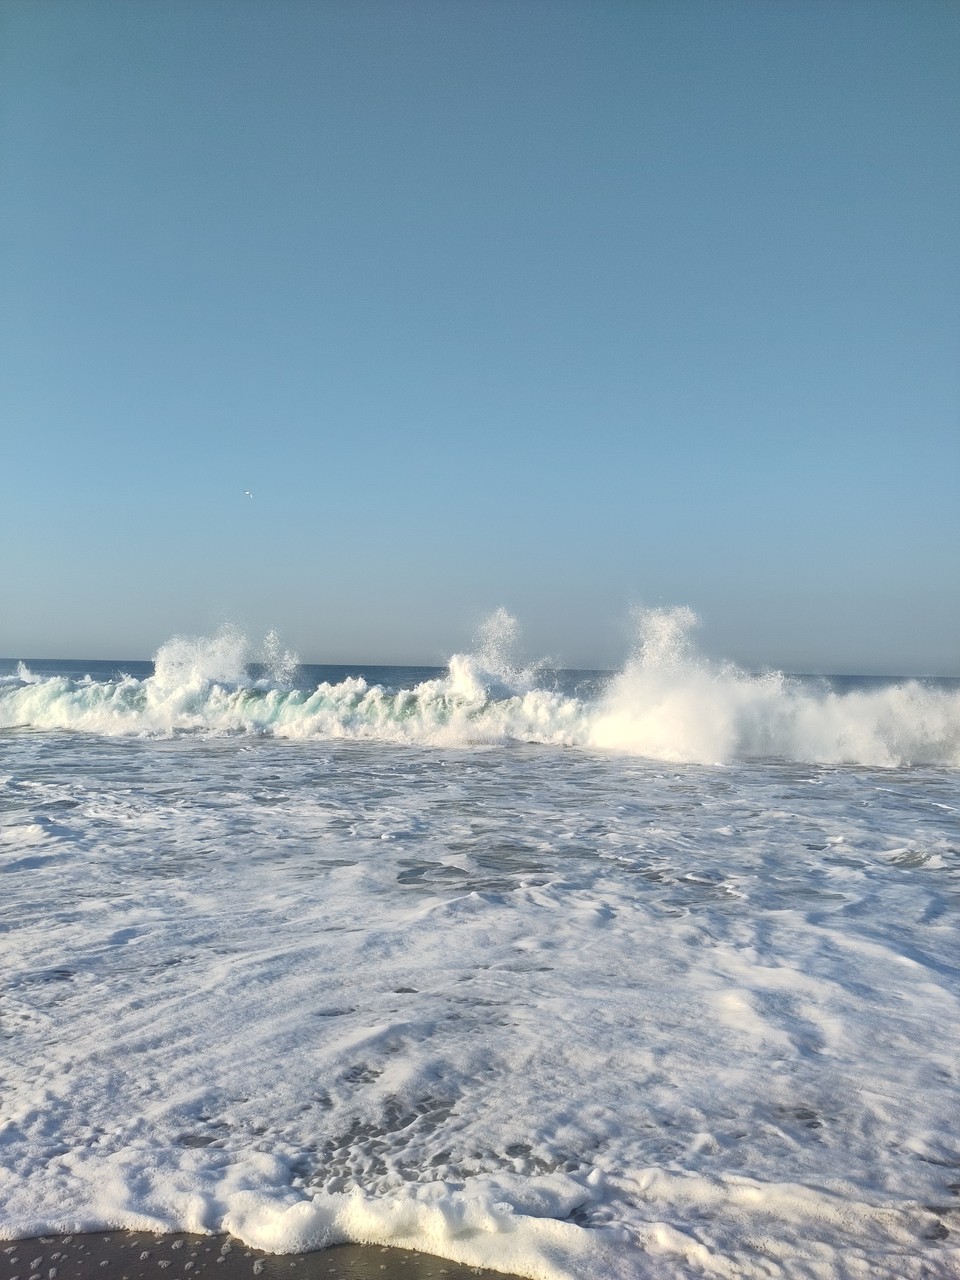 The sea explodes with a thundering roar